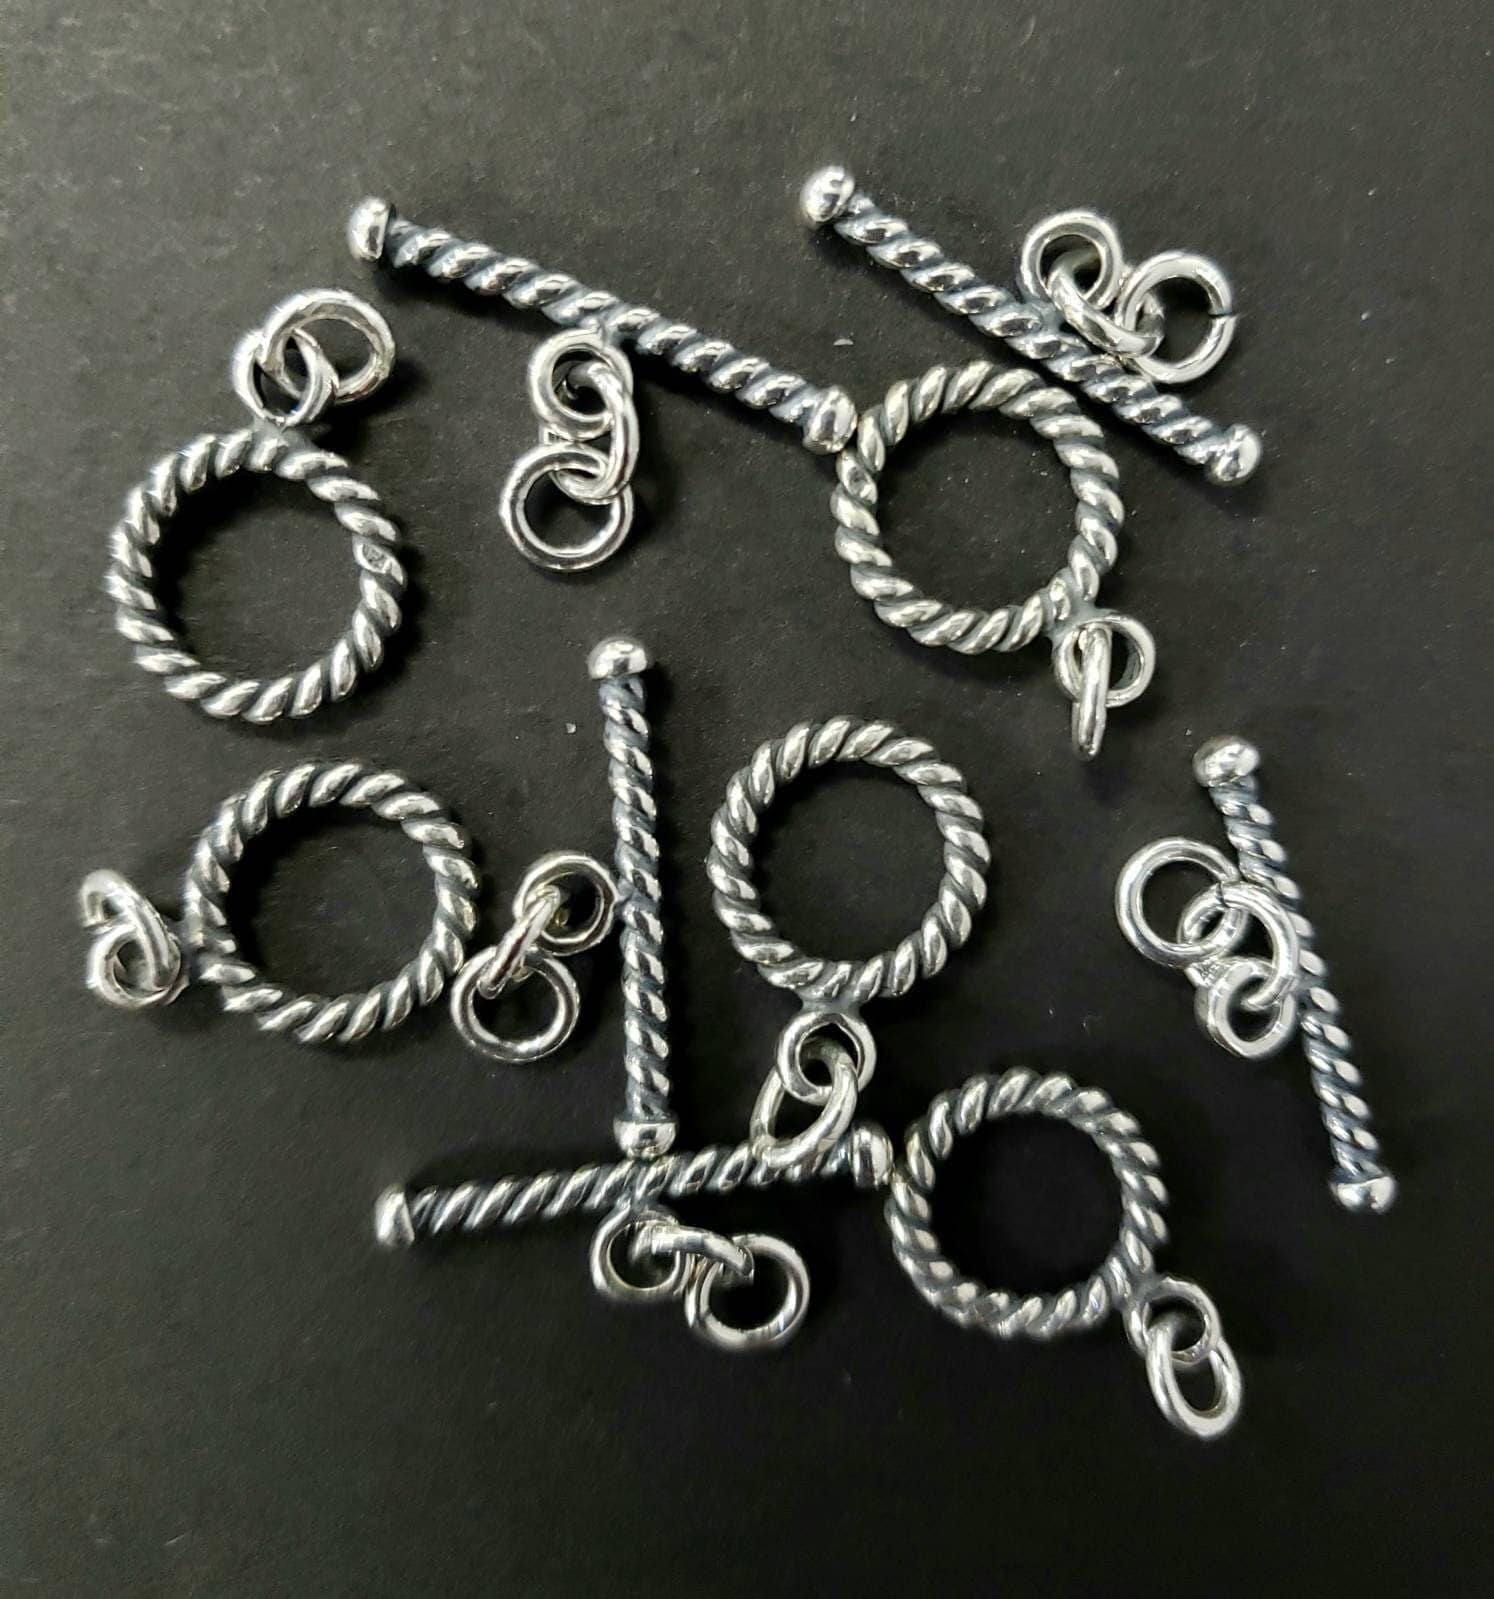 2 sets 925 sterling silver Bali 10.5mm round rope toggle clasp. Vintage Handmade antique finished Bali toggle for Jewelry making supplies.